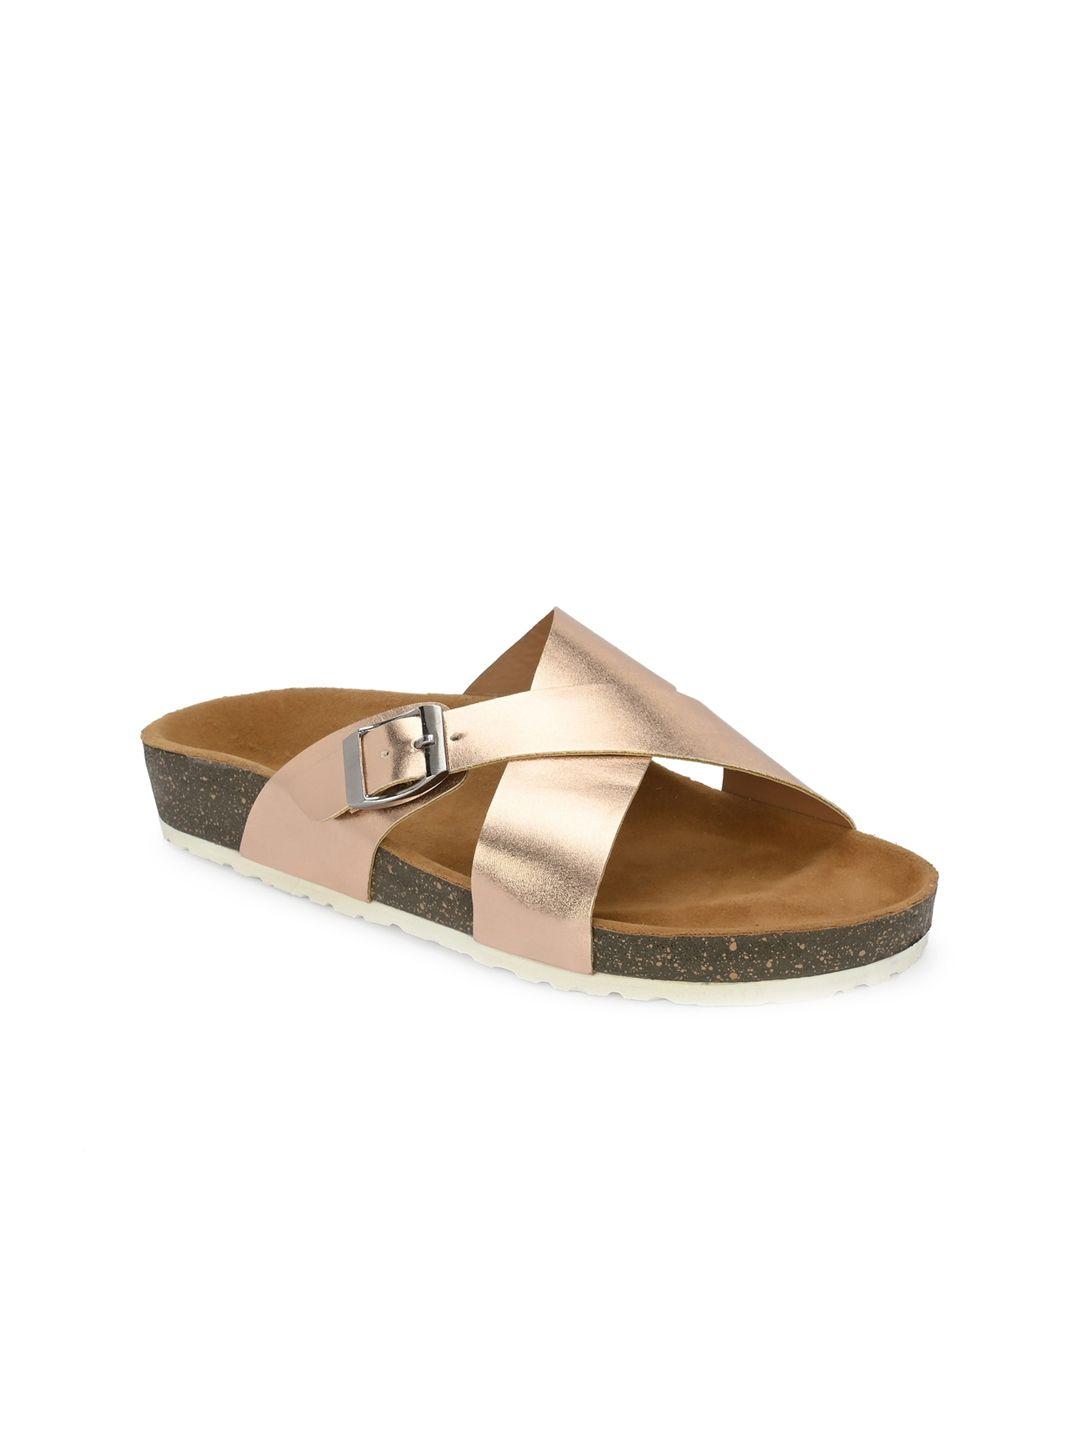 here&now gold-toned cross strap open toe flats